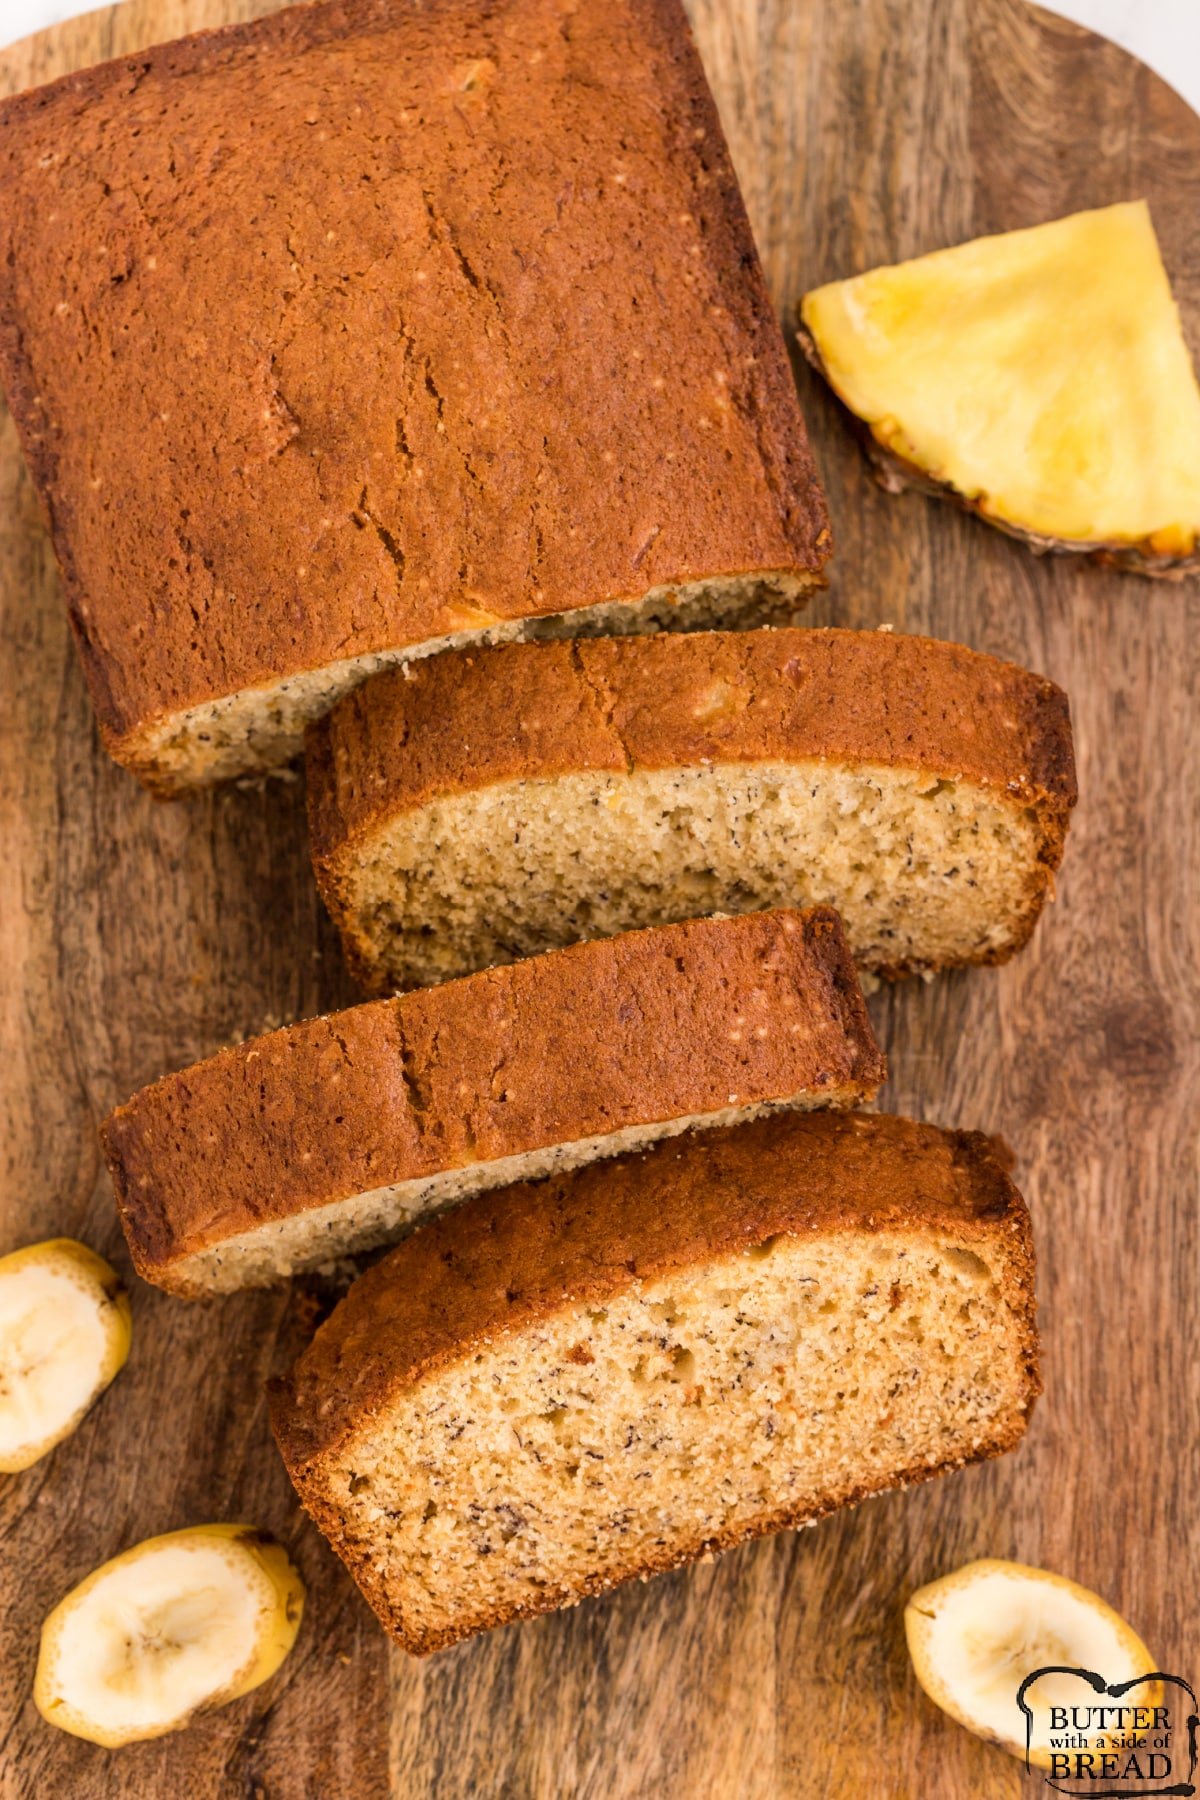 Sliced banana bread made with crushed pineapple